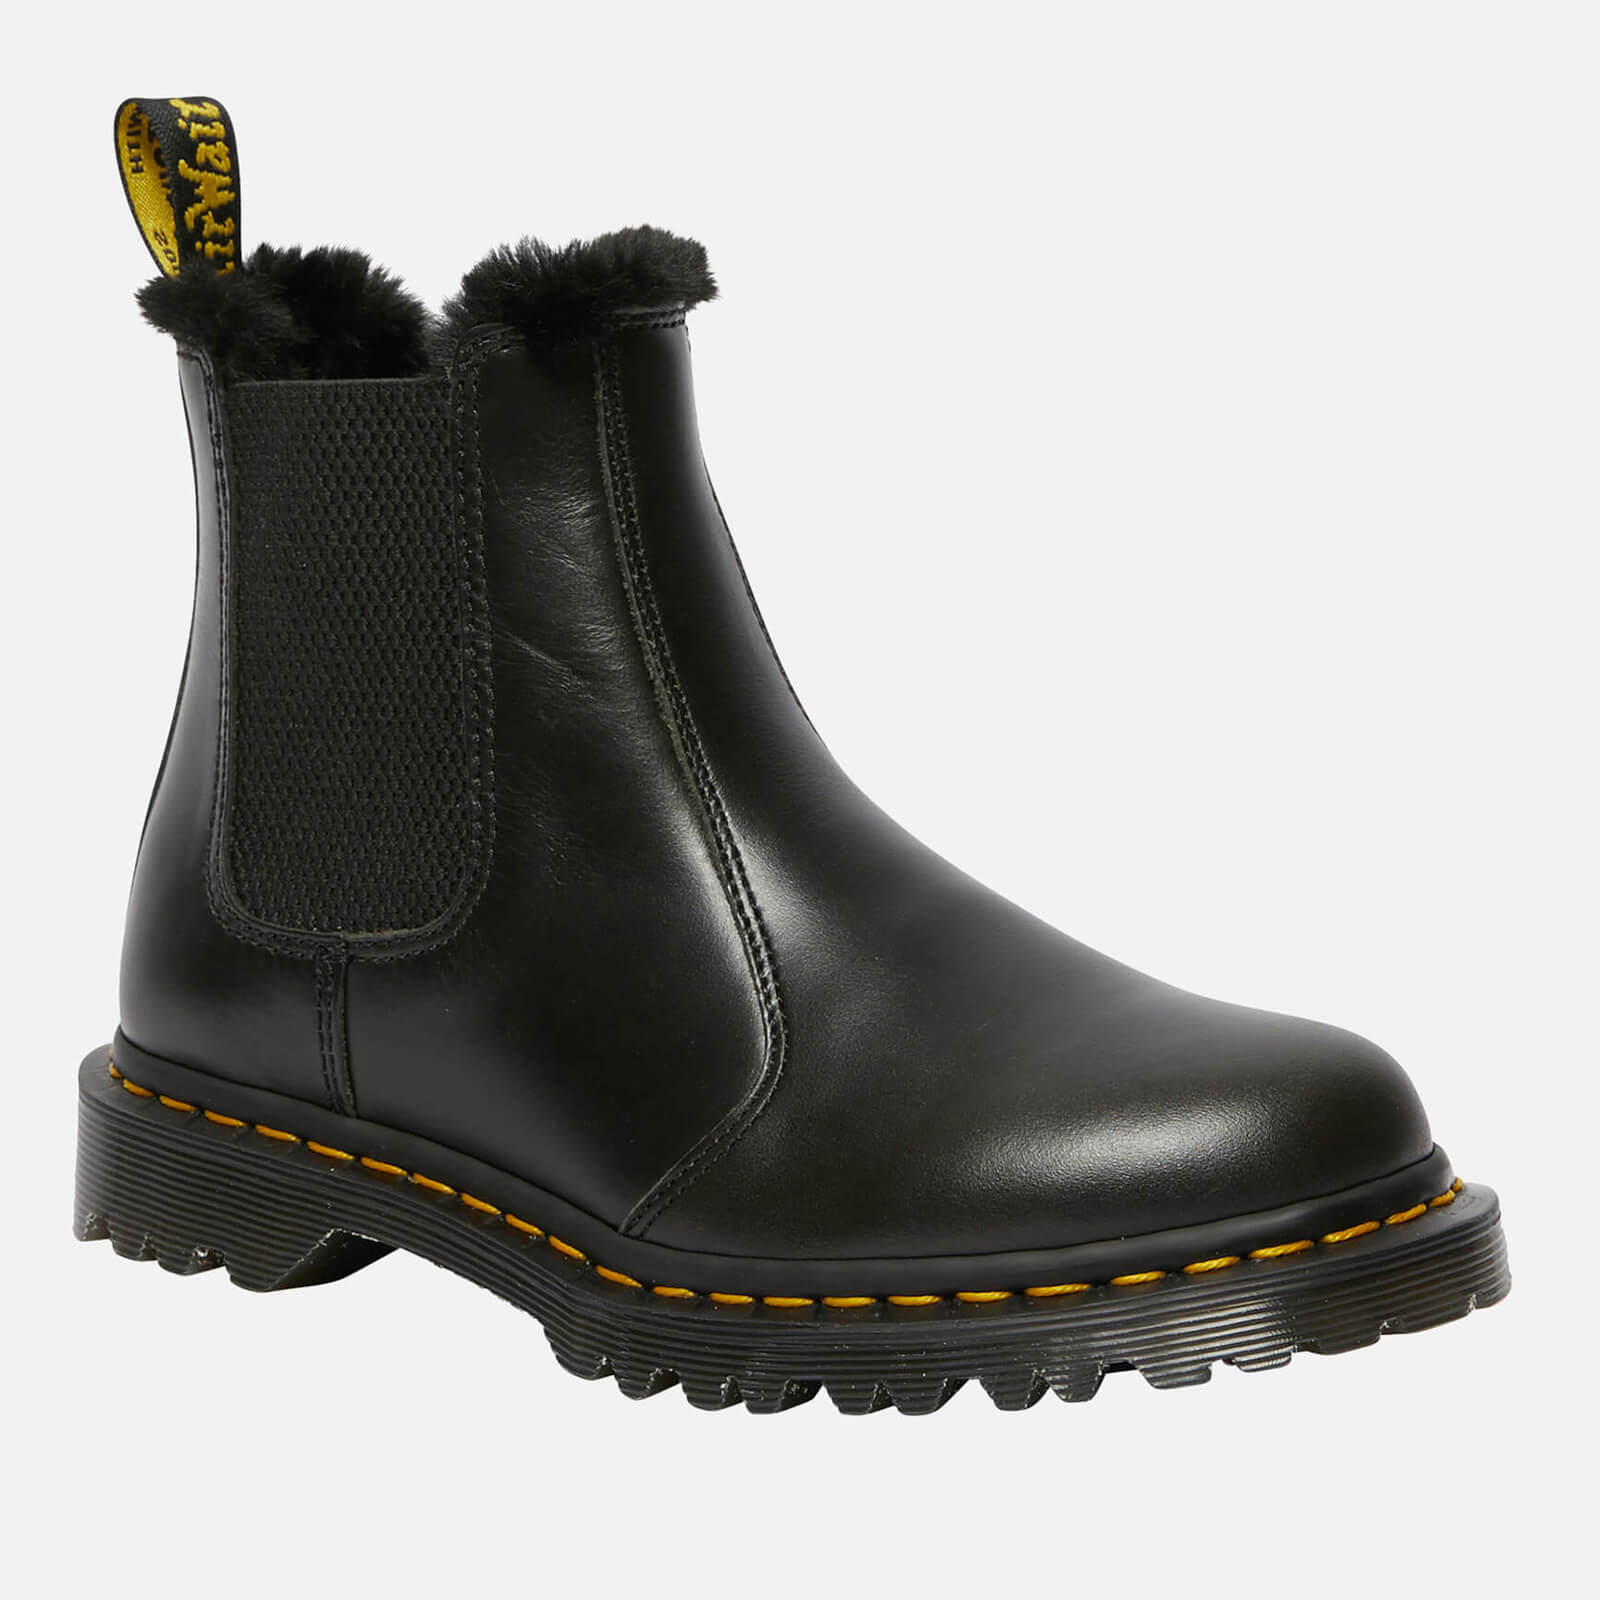 Dr. Martens Women’s 2976 Leonore Fur Lined Leather Chelsea Boots - Dark Grey